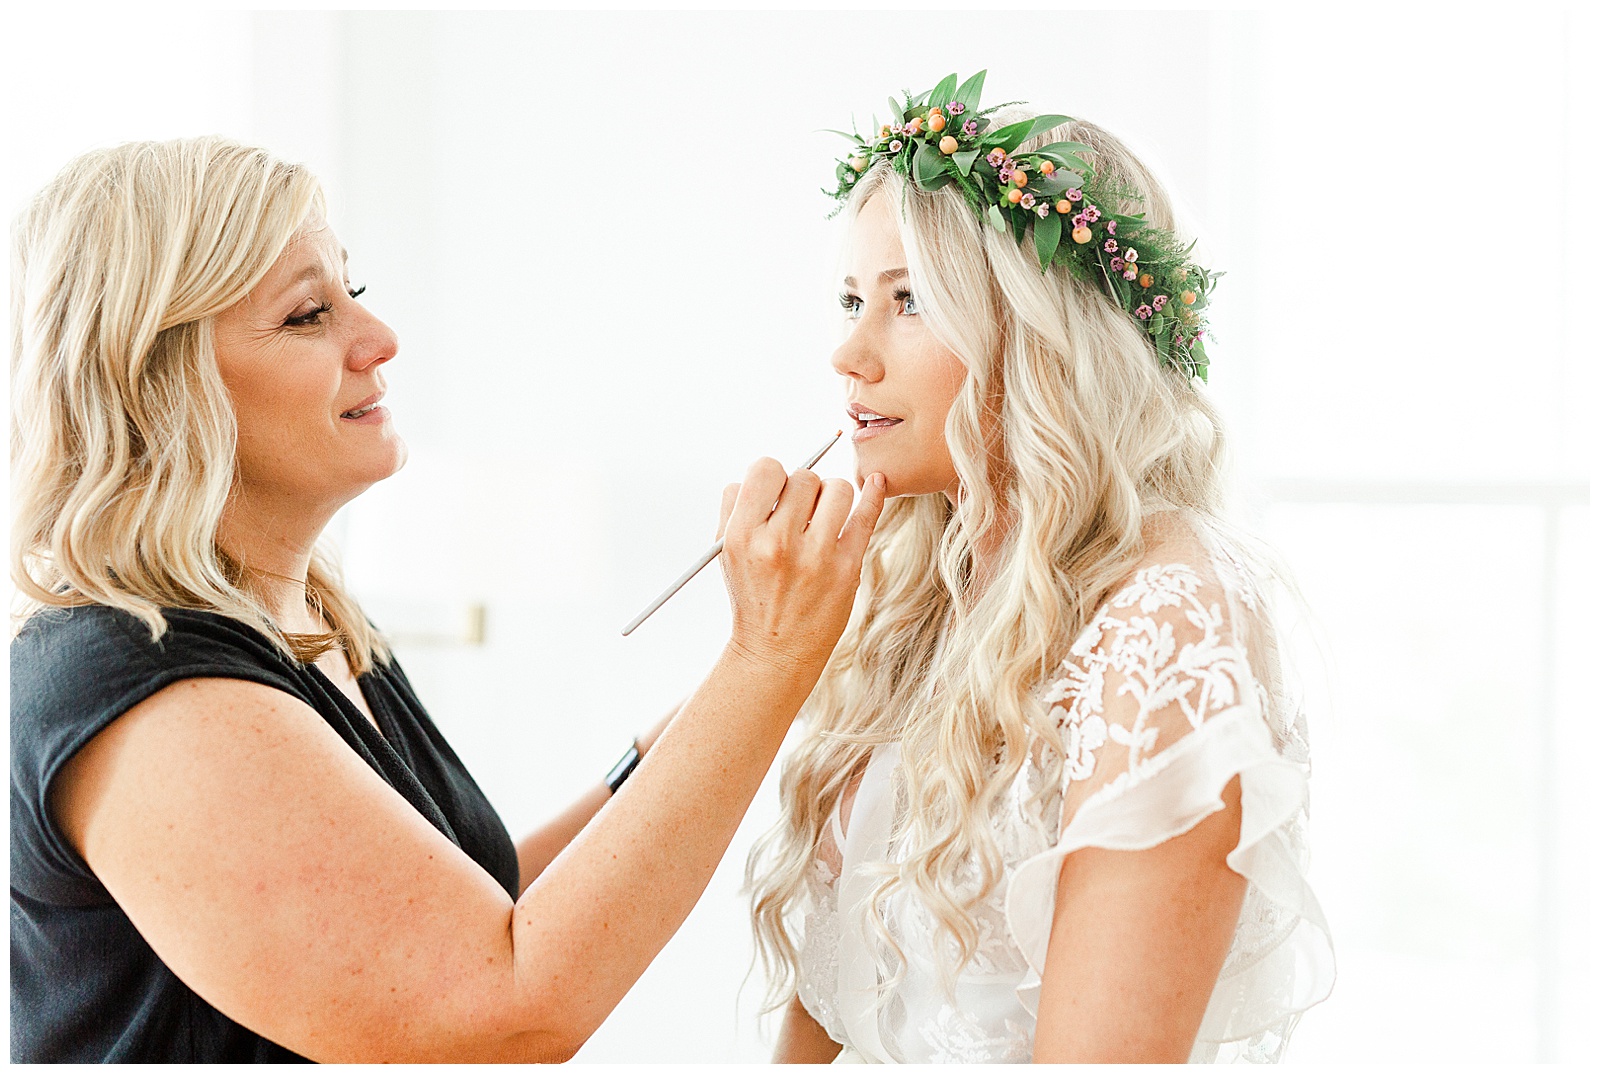 Natural Wedding Makeup for Blue Eyes Blonde Hair - Bright Boho Chic Theme in Charlotte, North Carolina | check out the full wedding at KevynDixonPhoto.com